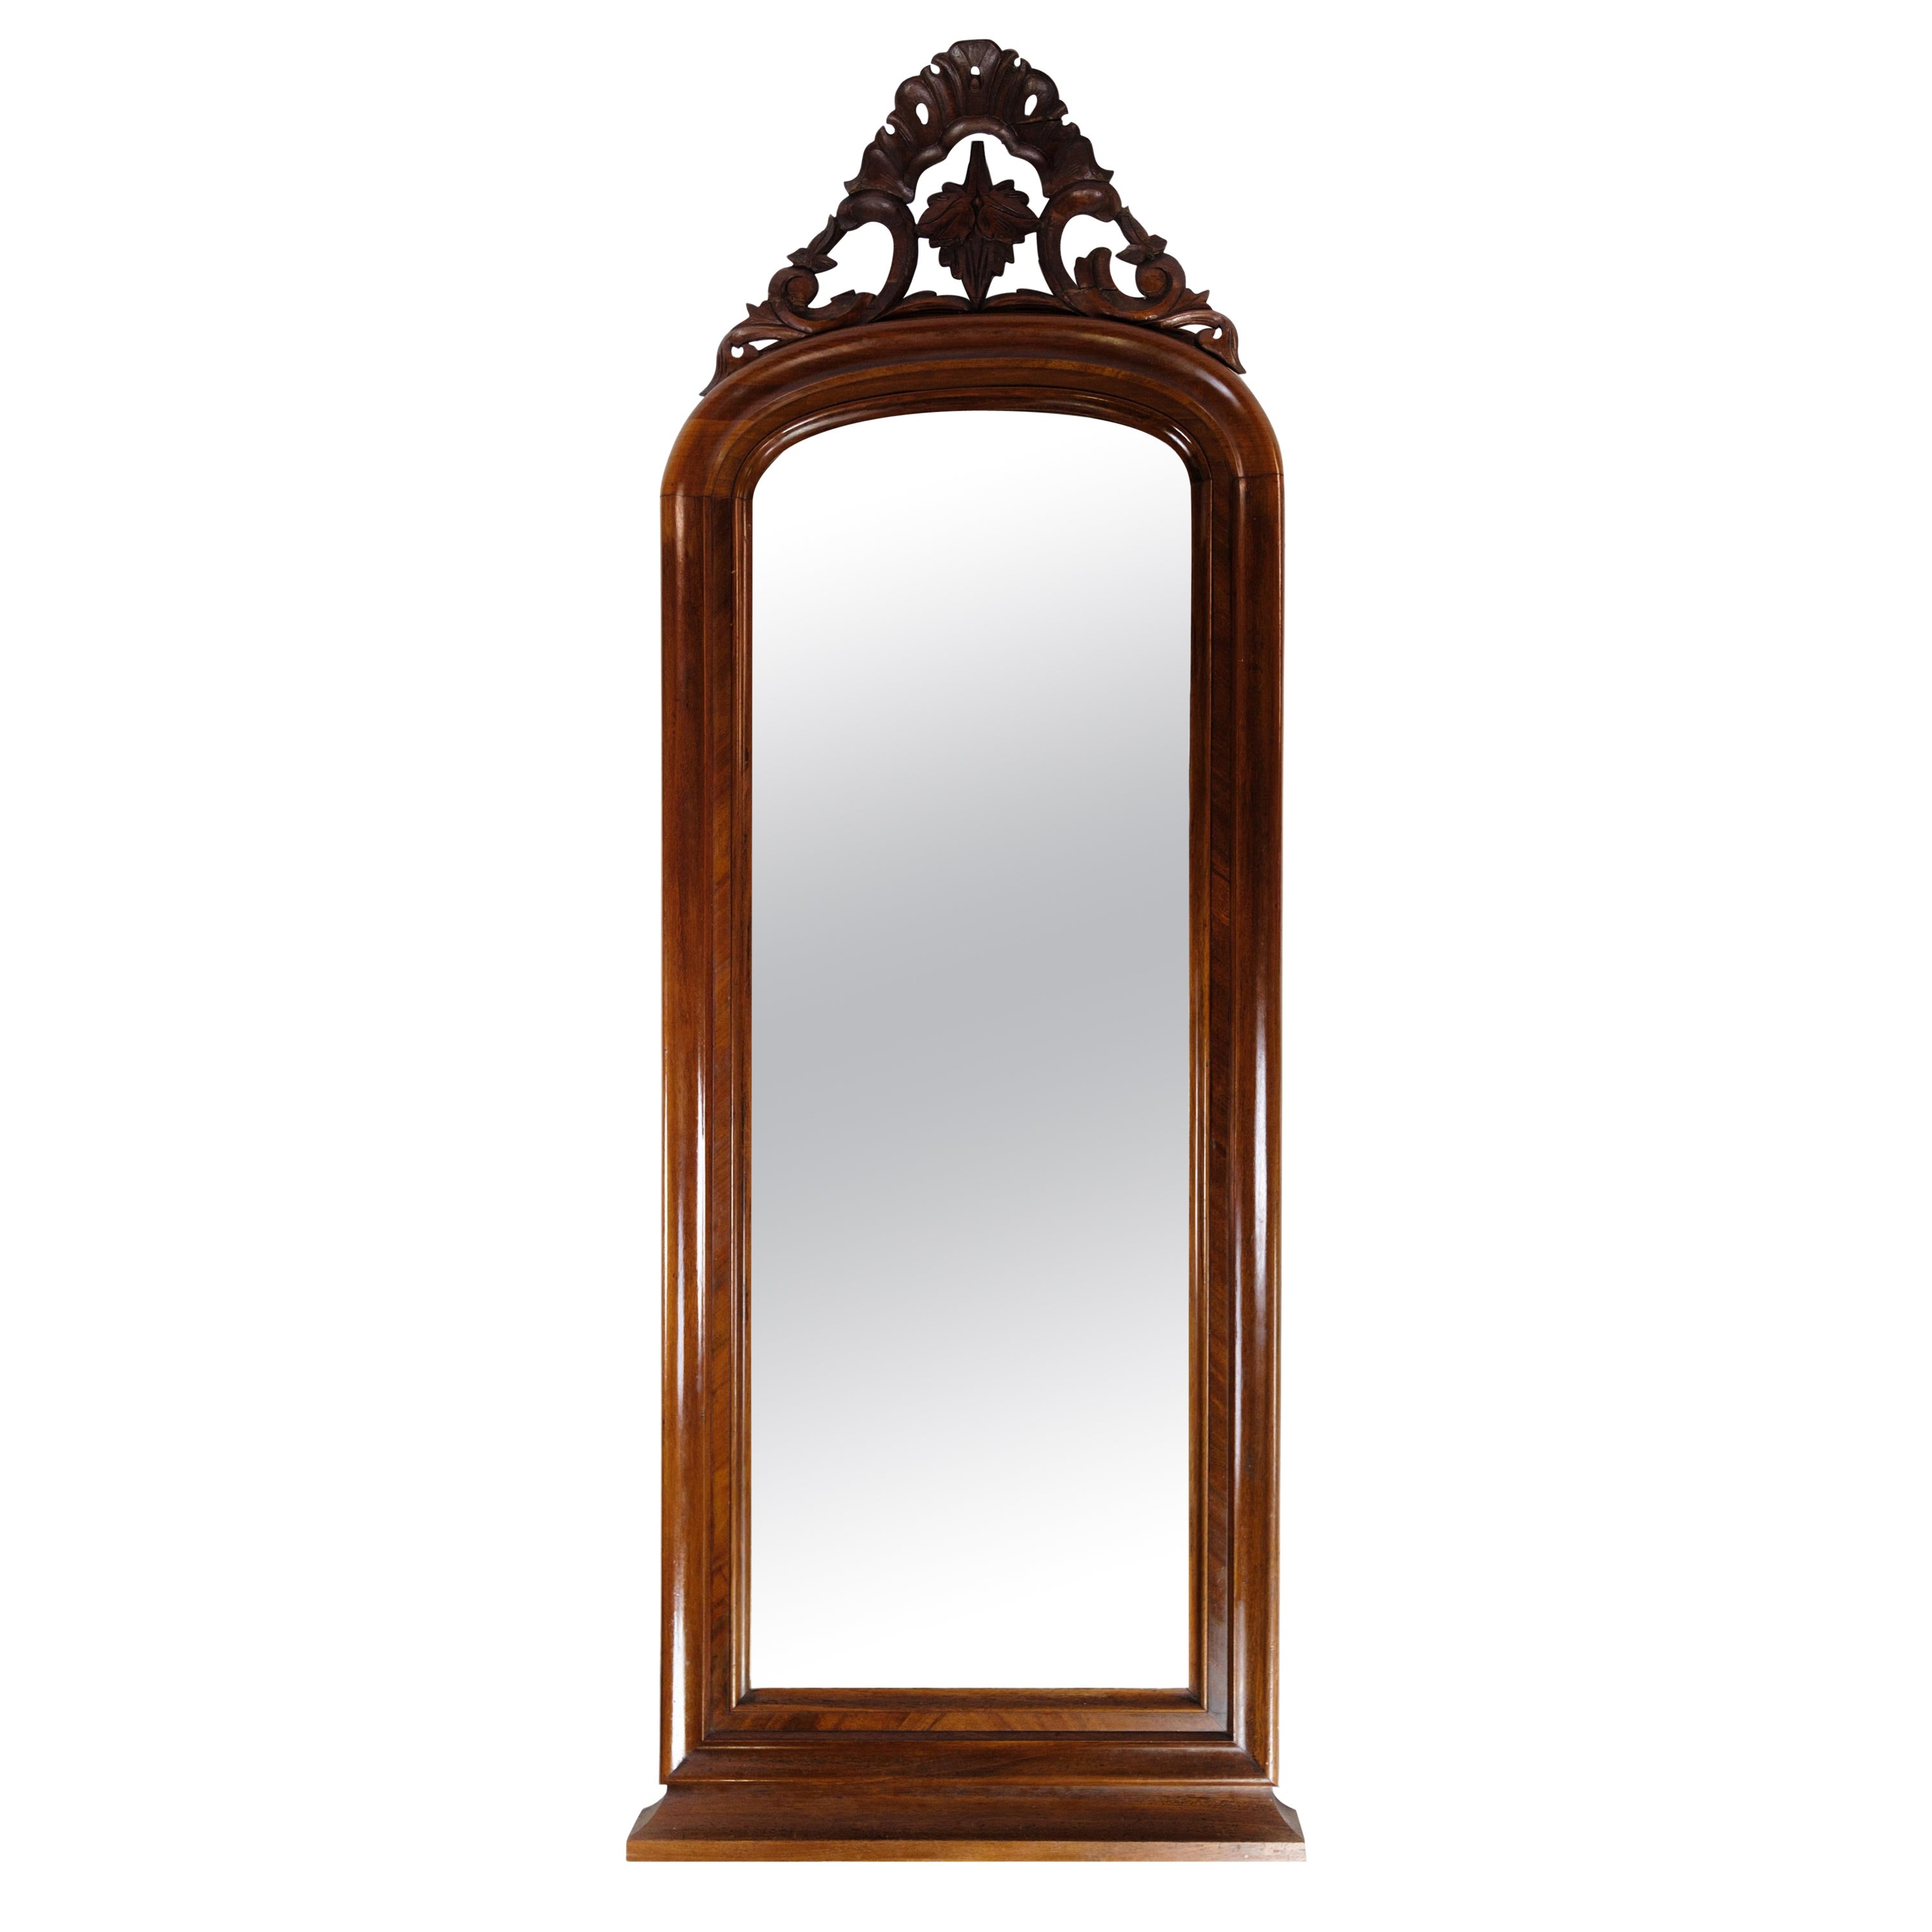 Antique Mirror in Mahogany Wood, Decorated with Carvings from Around the 1860s For Sale